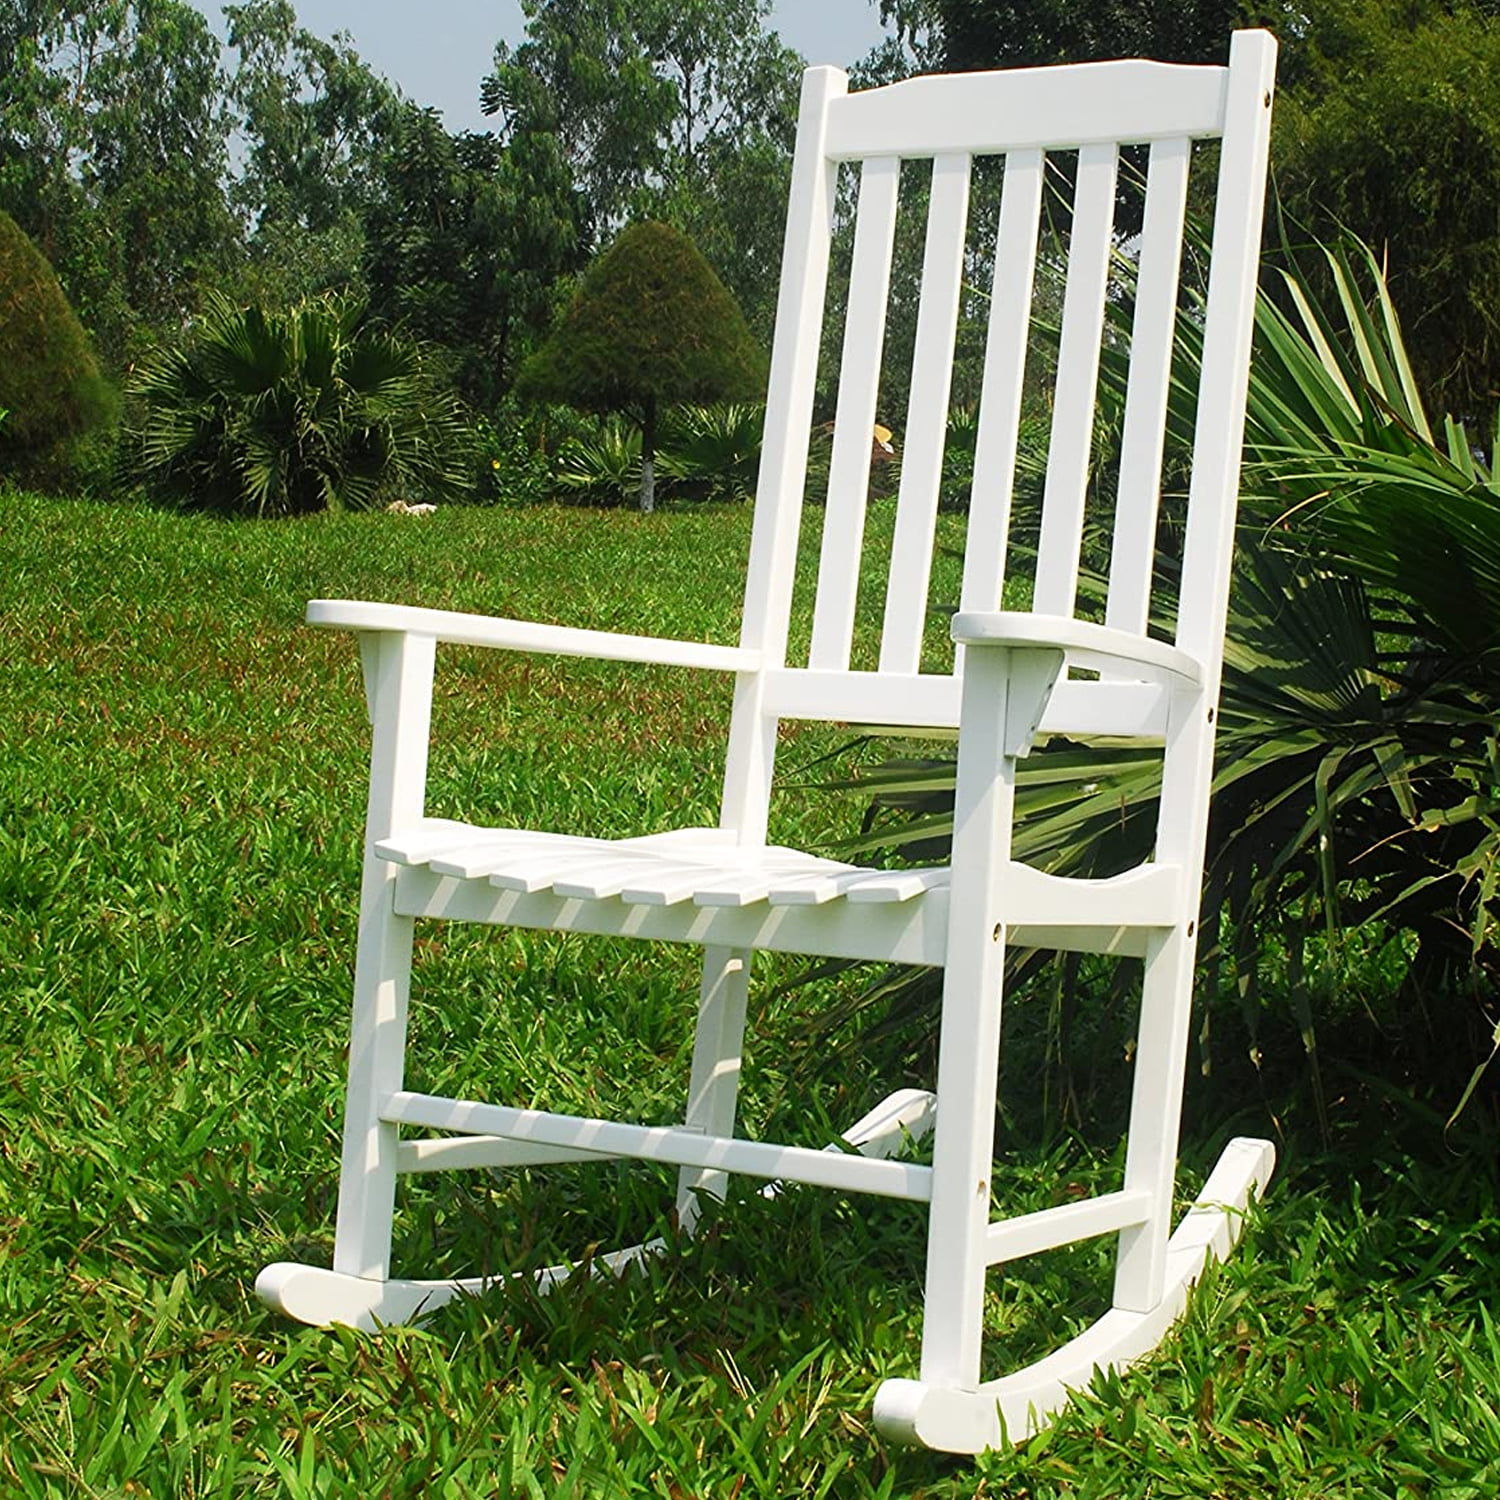 SUNBRANO Wooden Rocking Chair White Classic Outdoor and Indoor Porch All-Weather Rocker with 352 lbs Duty Rating for Patio Garden Balcony and Living Rooms